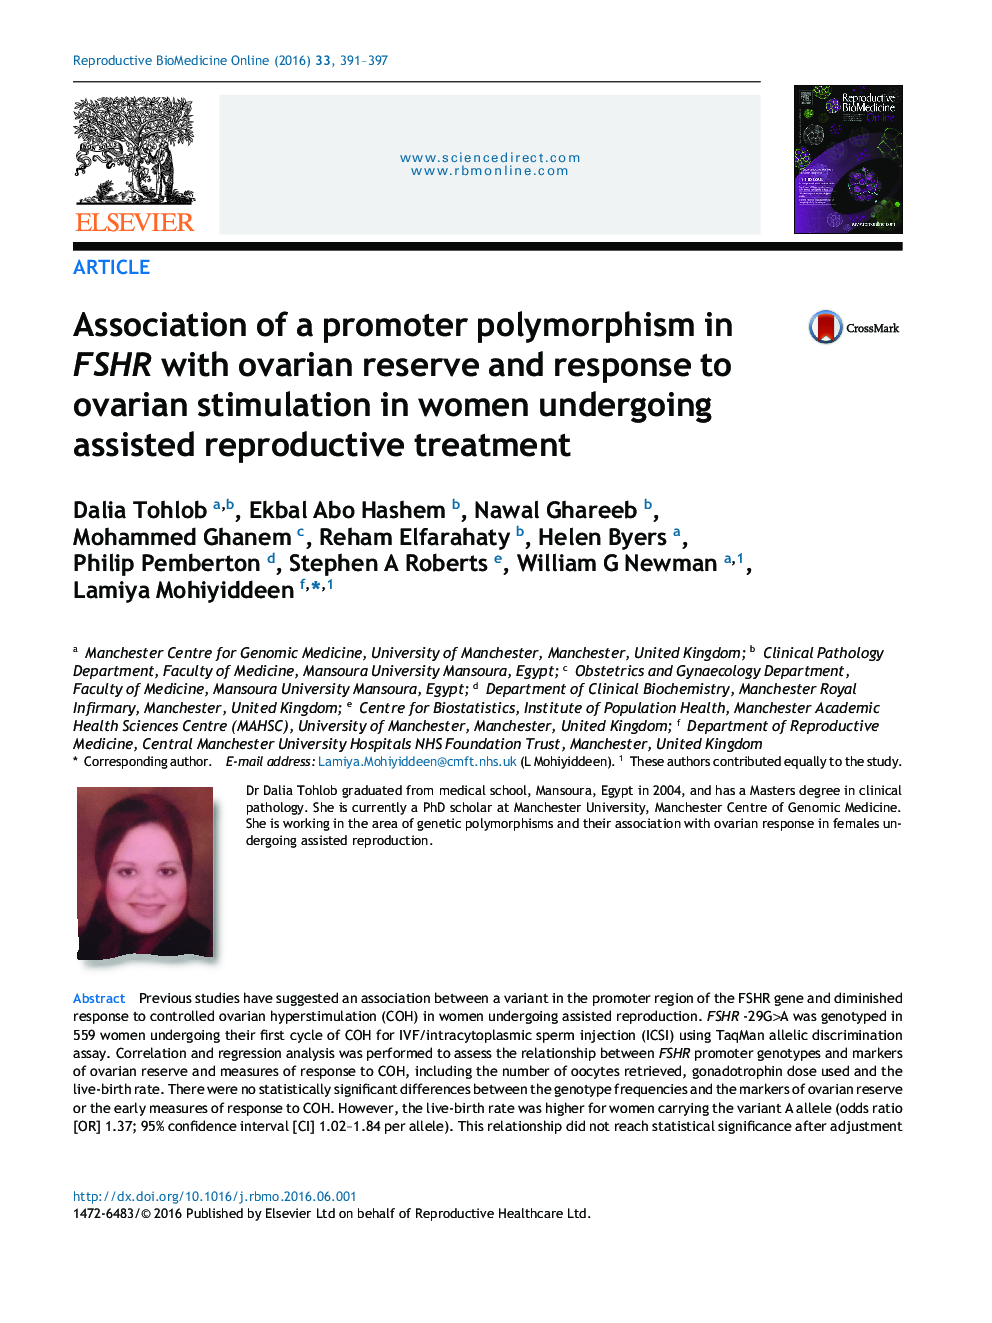 Association of a promoter polymorphism in FSHR with ovarian reserve and response to ovarian stimulation in women undergoing assisted reproductive treatment